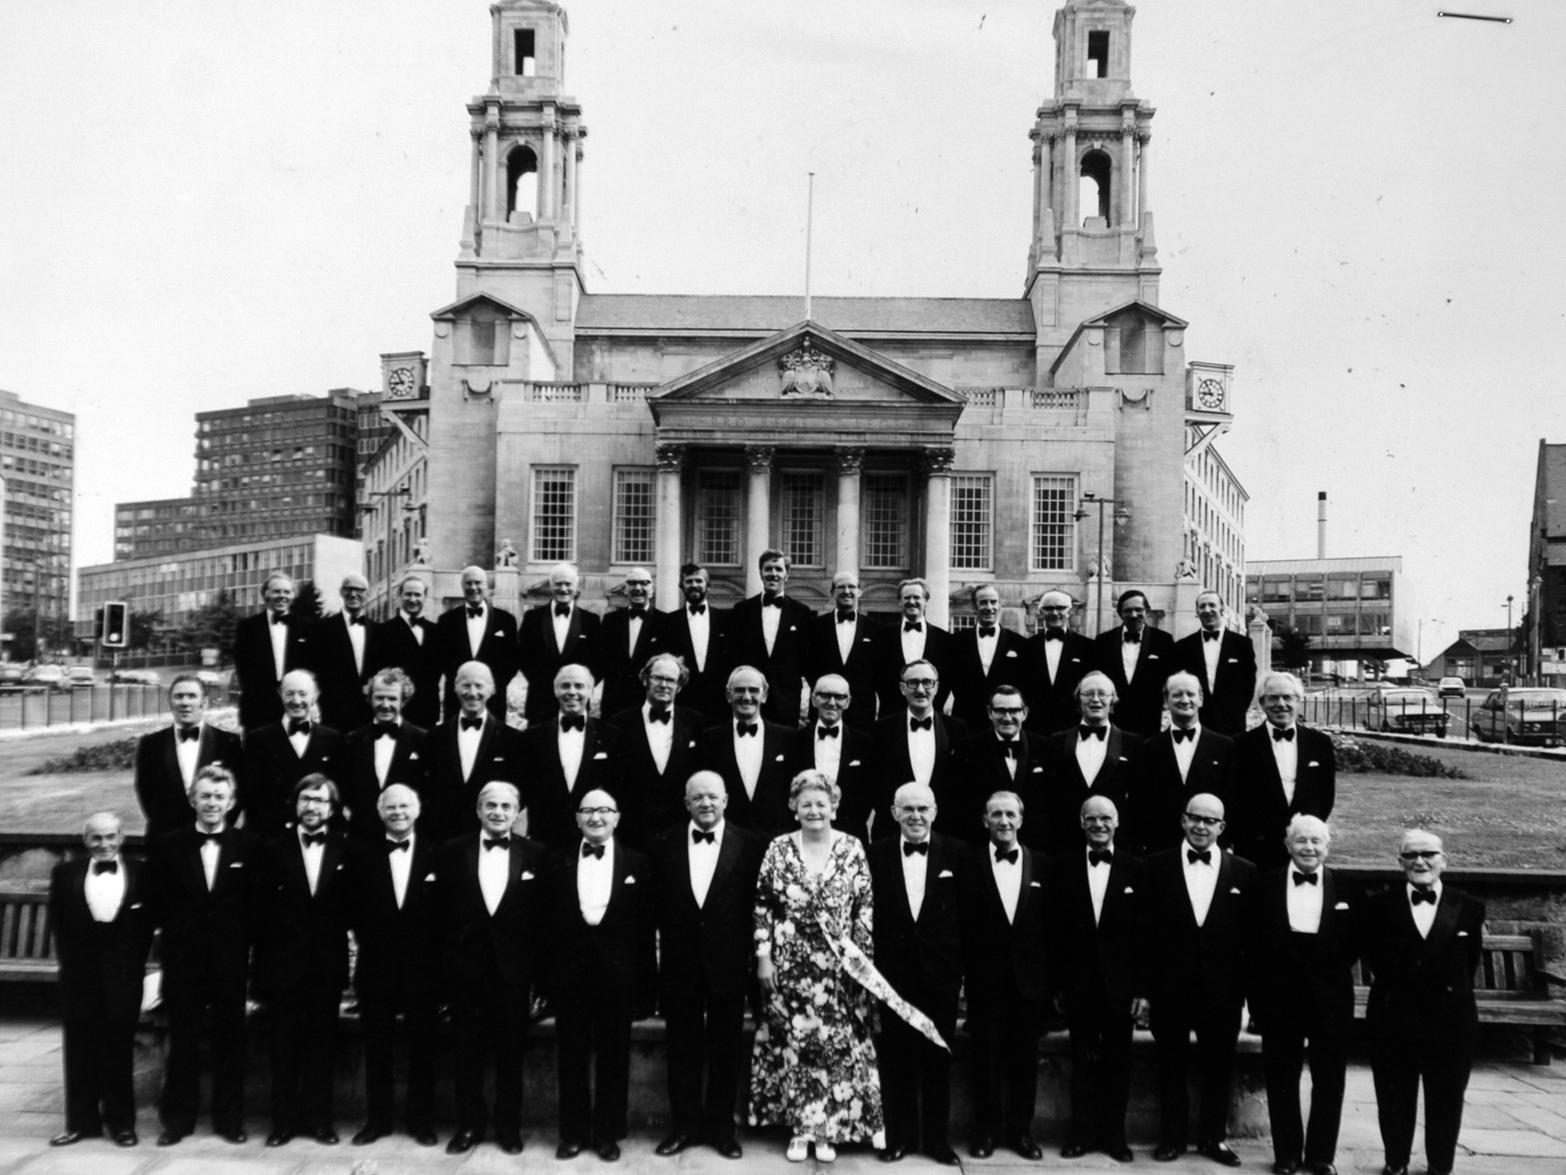 Leeds Male Voice Choir in front of the Civic Hall after finishing runners up in the Morecambe Music Festival.